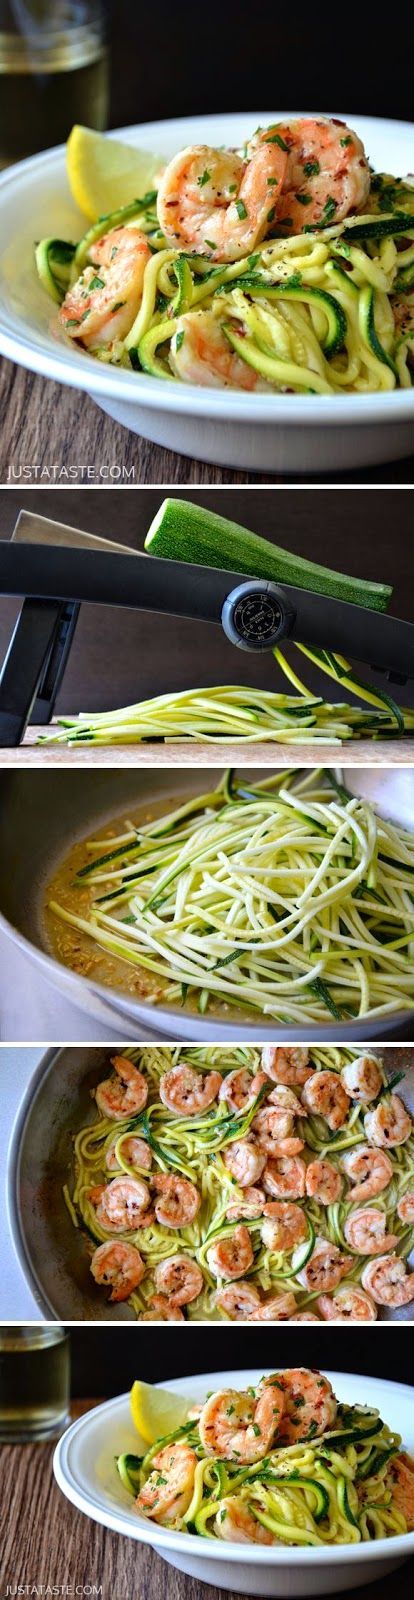 Zucchini noodle pasta! Yummo! Add even more fresh and ideally organic produce and veggies like peas for even more nutrition and